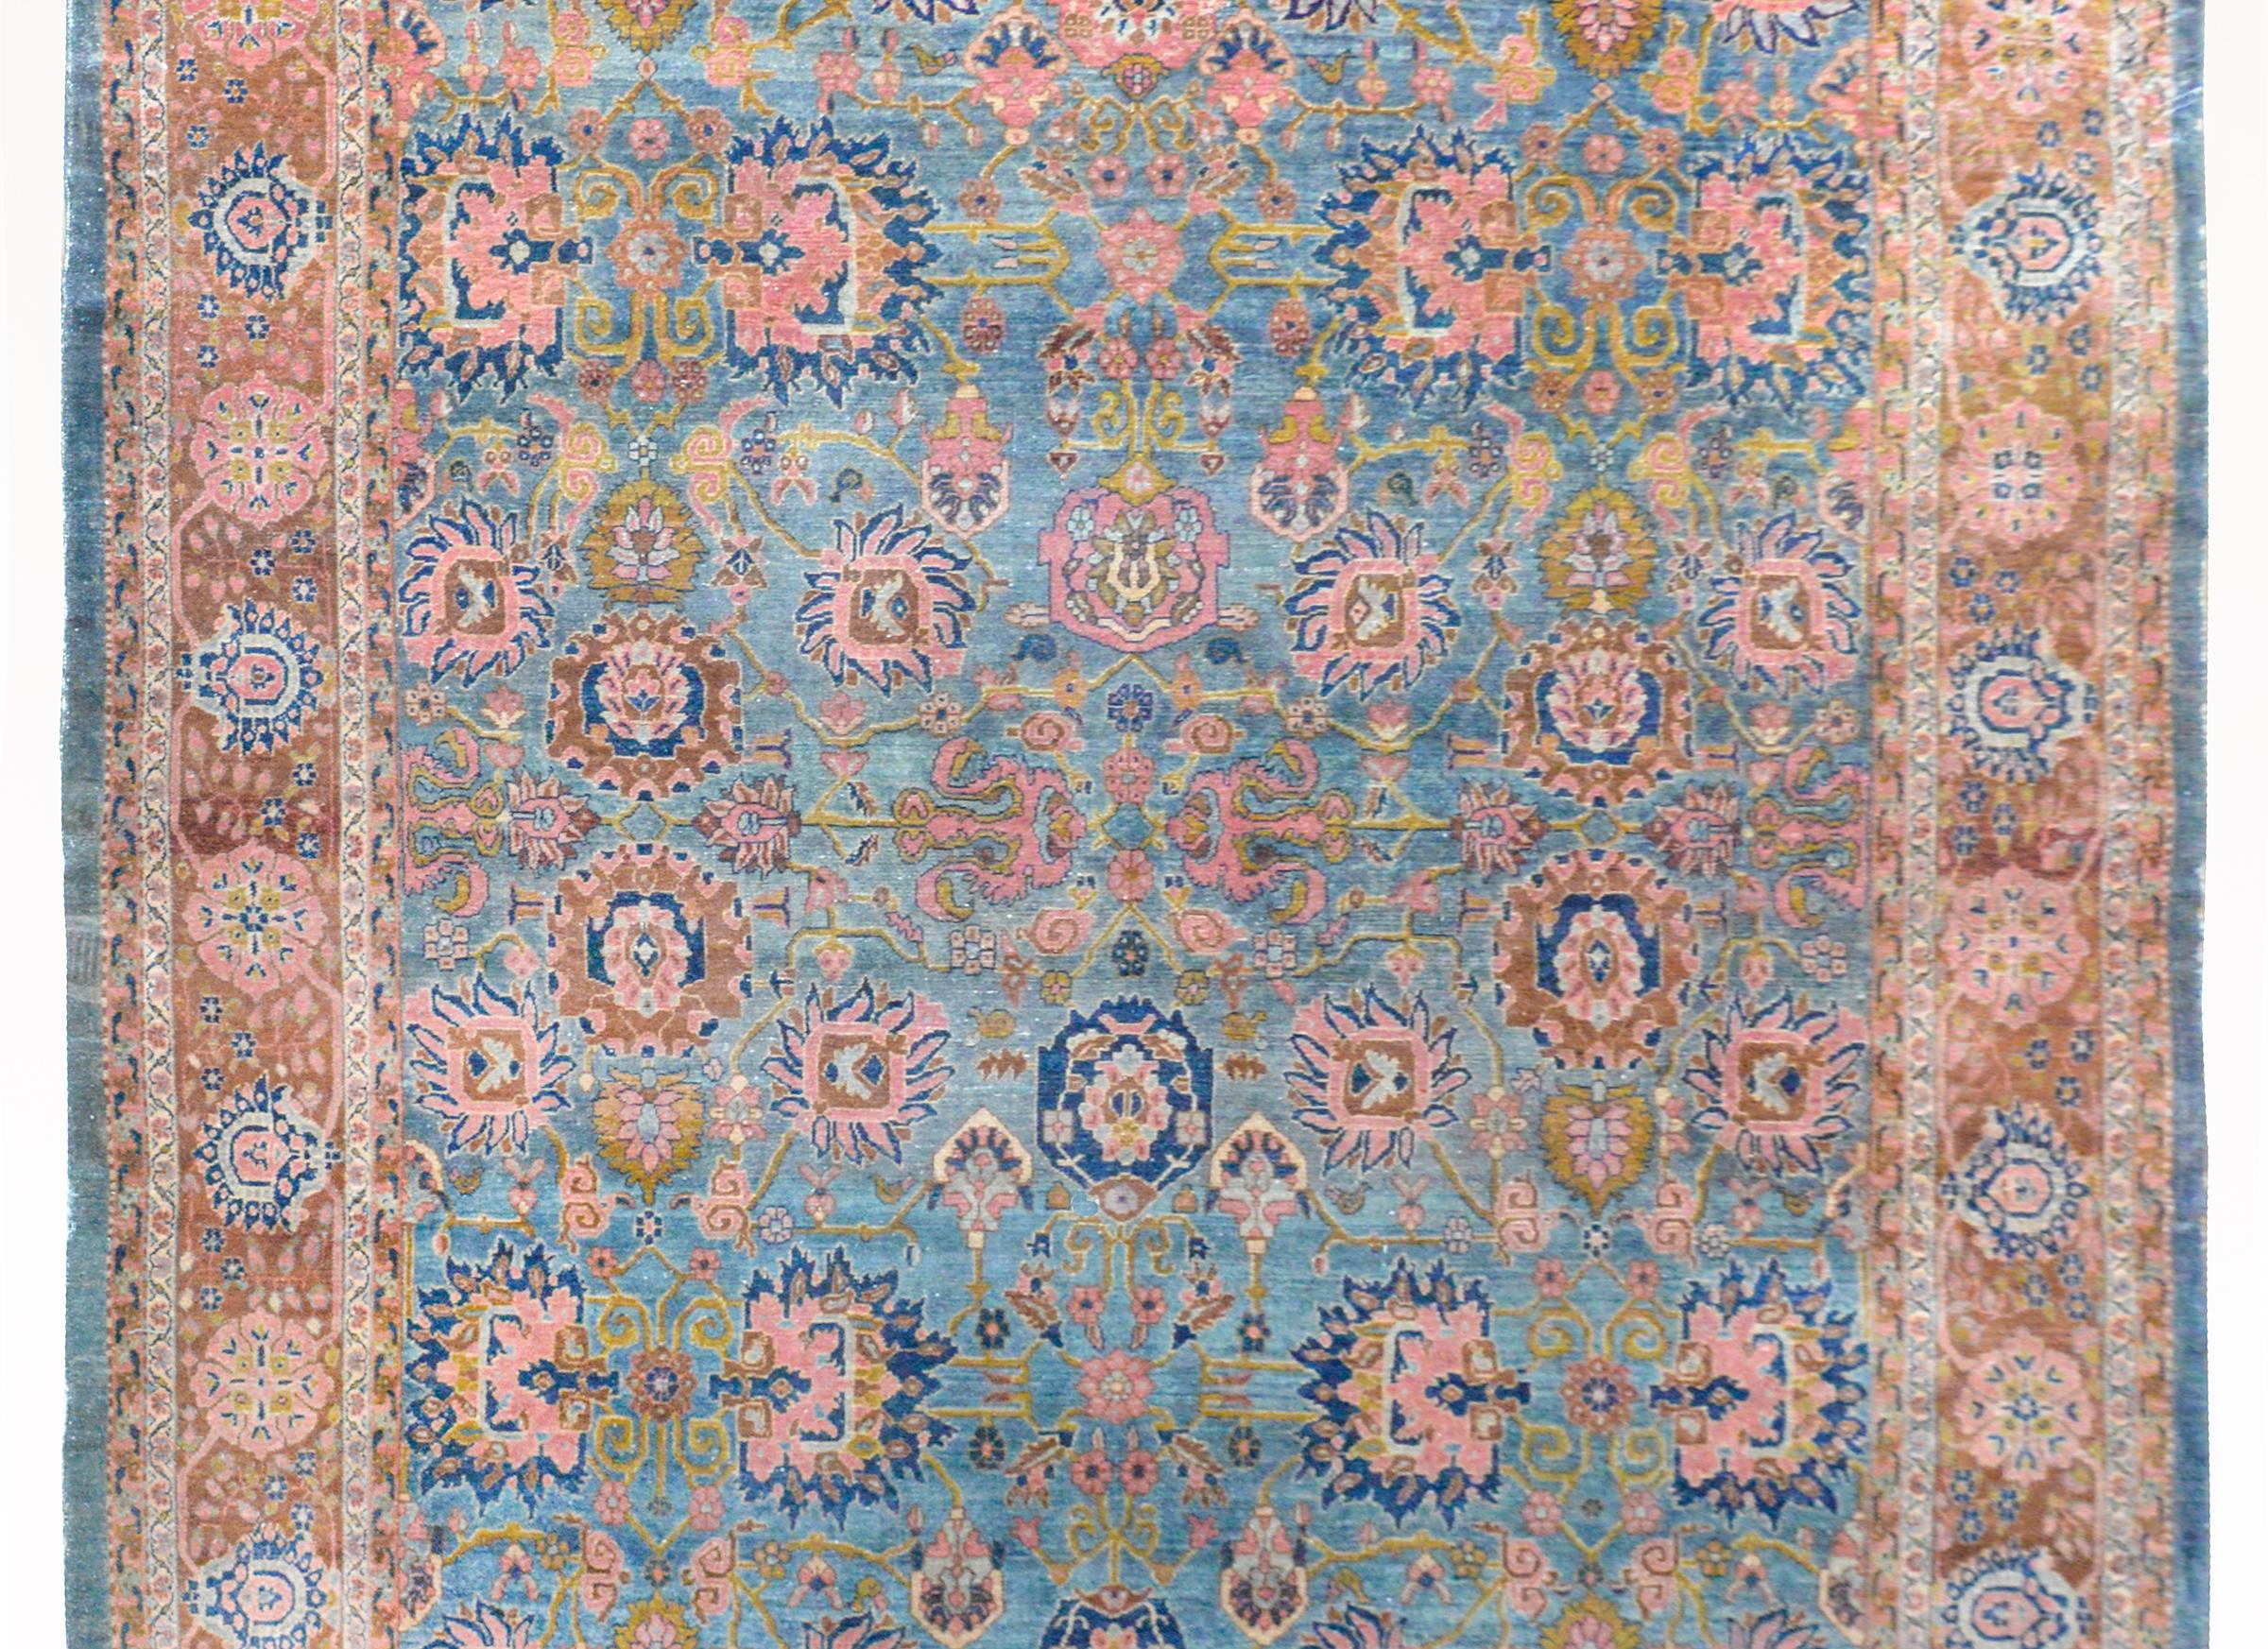 An incredible early 20th century Sultanabad rug with a beautiful all-over large-scale floral and scrolling vine pattern woven in bold colors including light and dark indigo, pink, turquoise, and burnt orange. The border is beautiful, and woven with